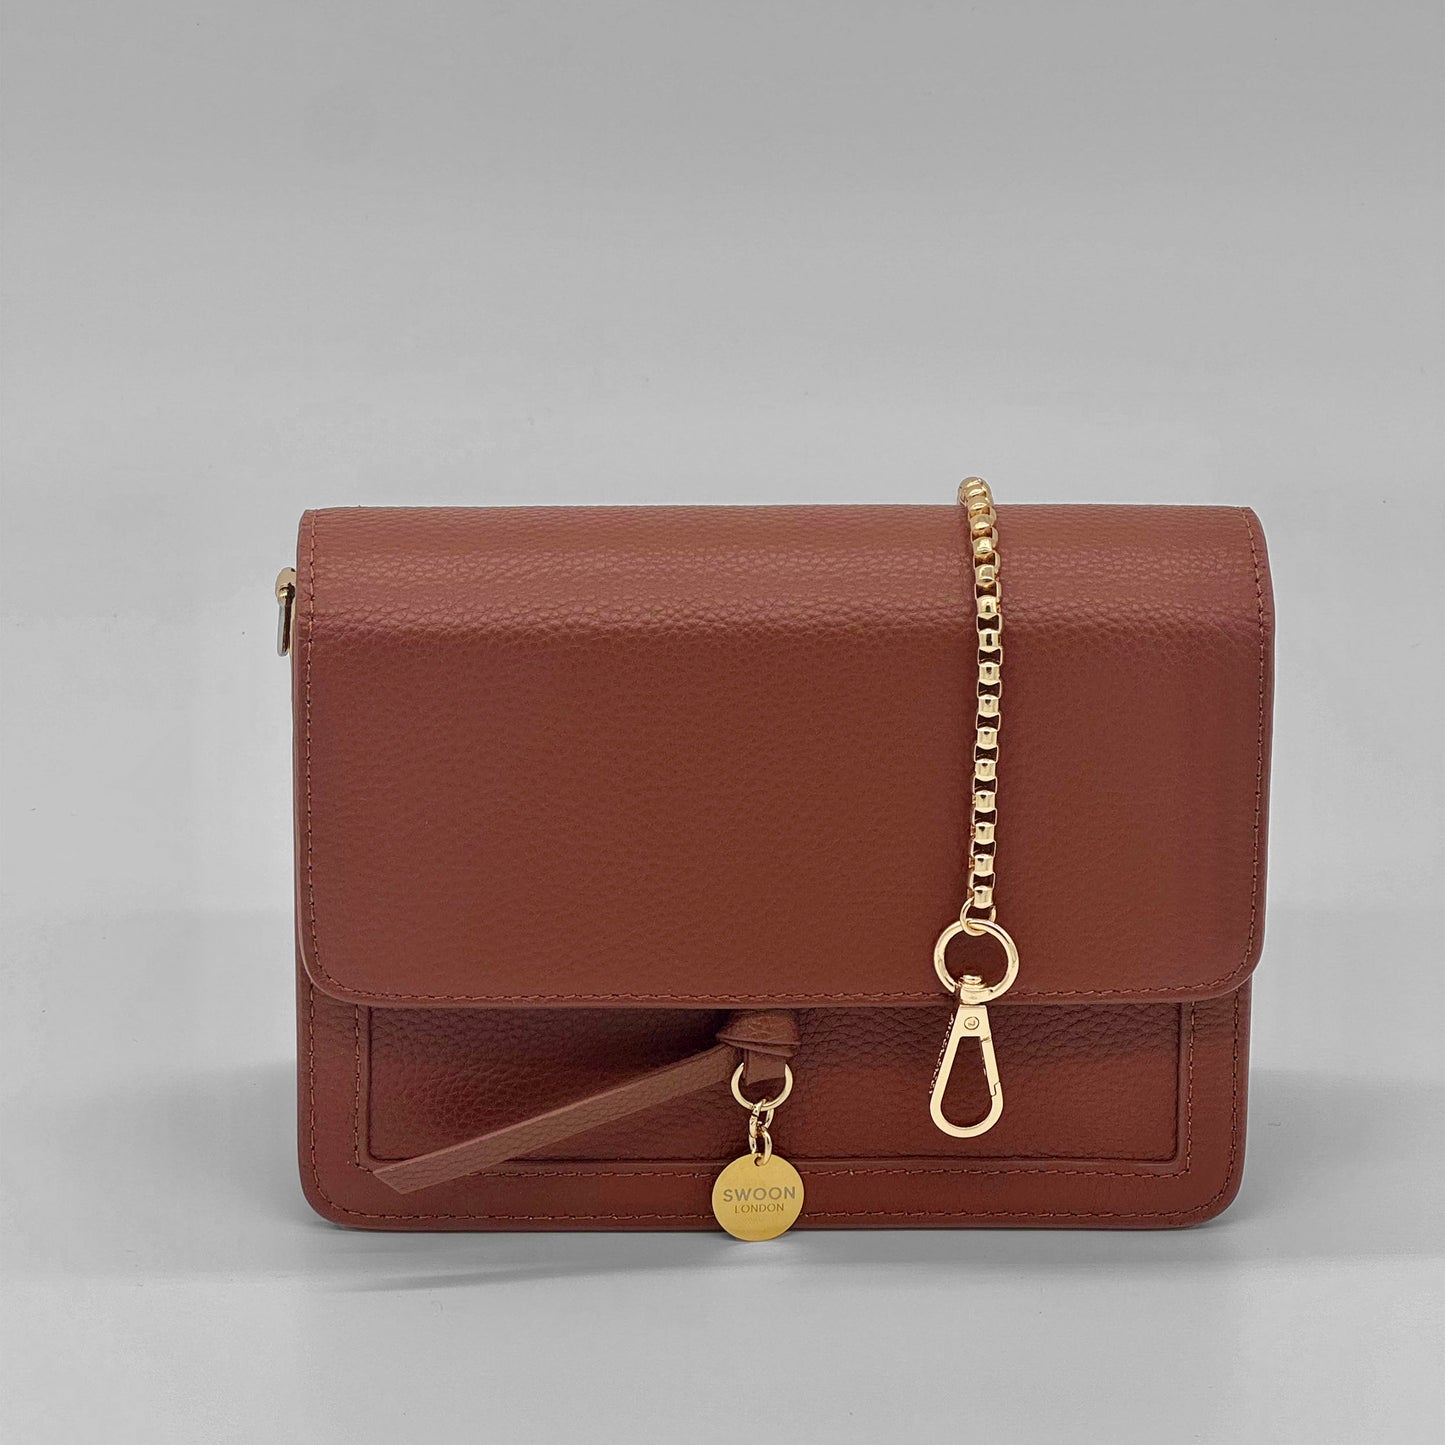 Bag with Gold Belcher Chain Bag Strap